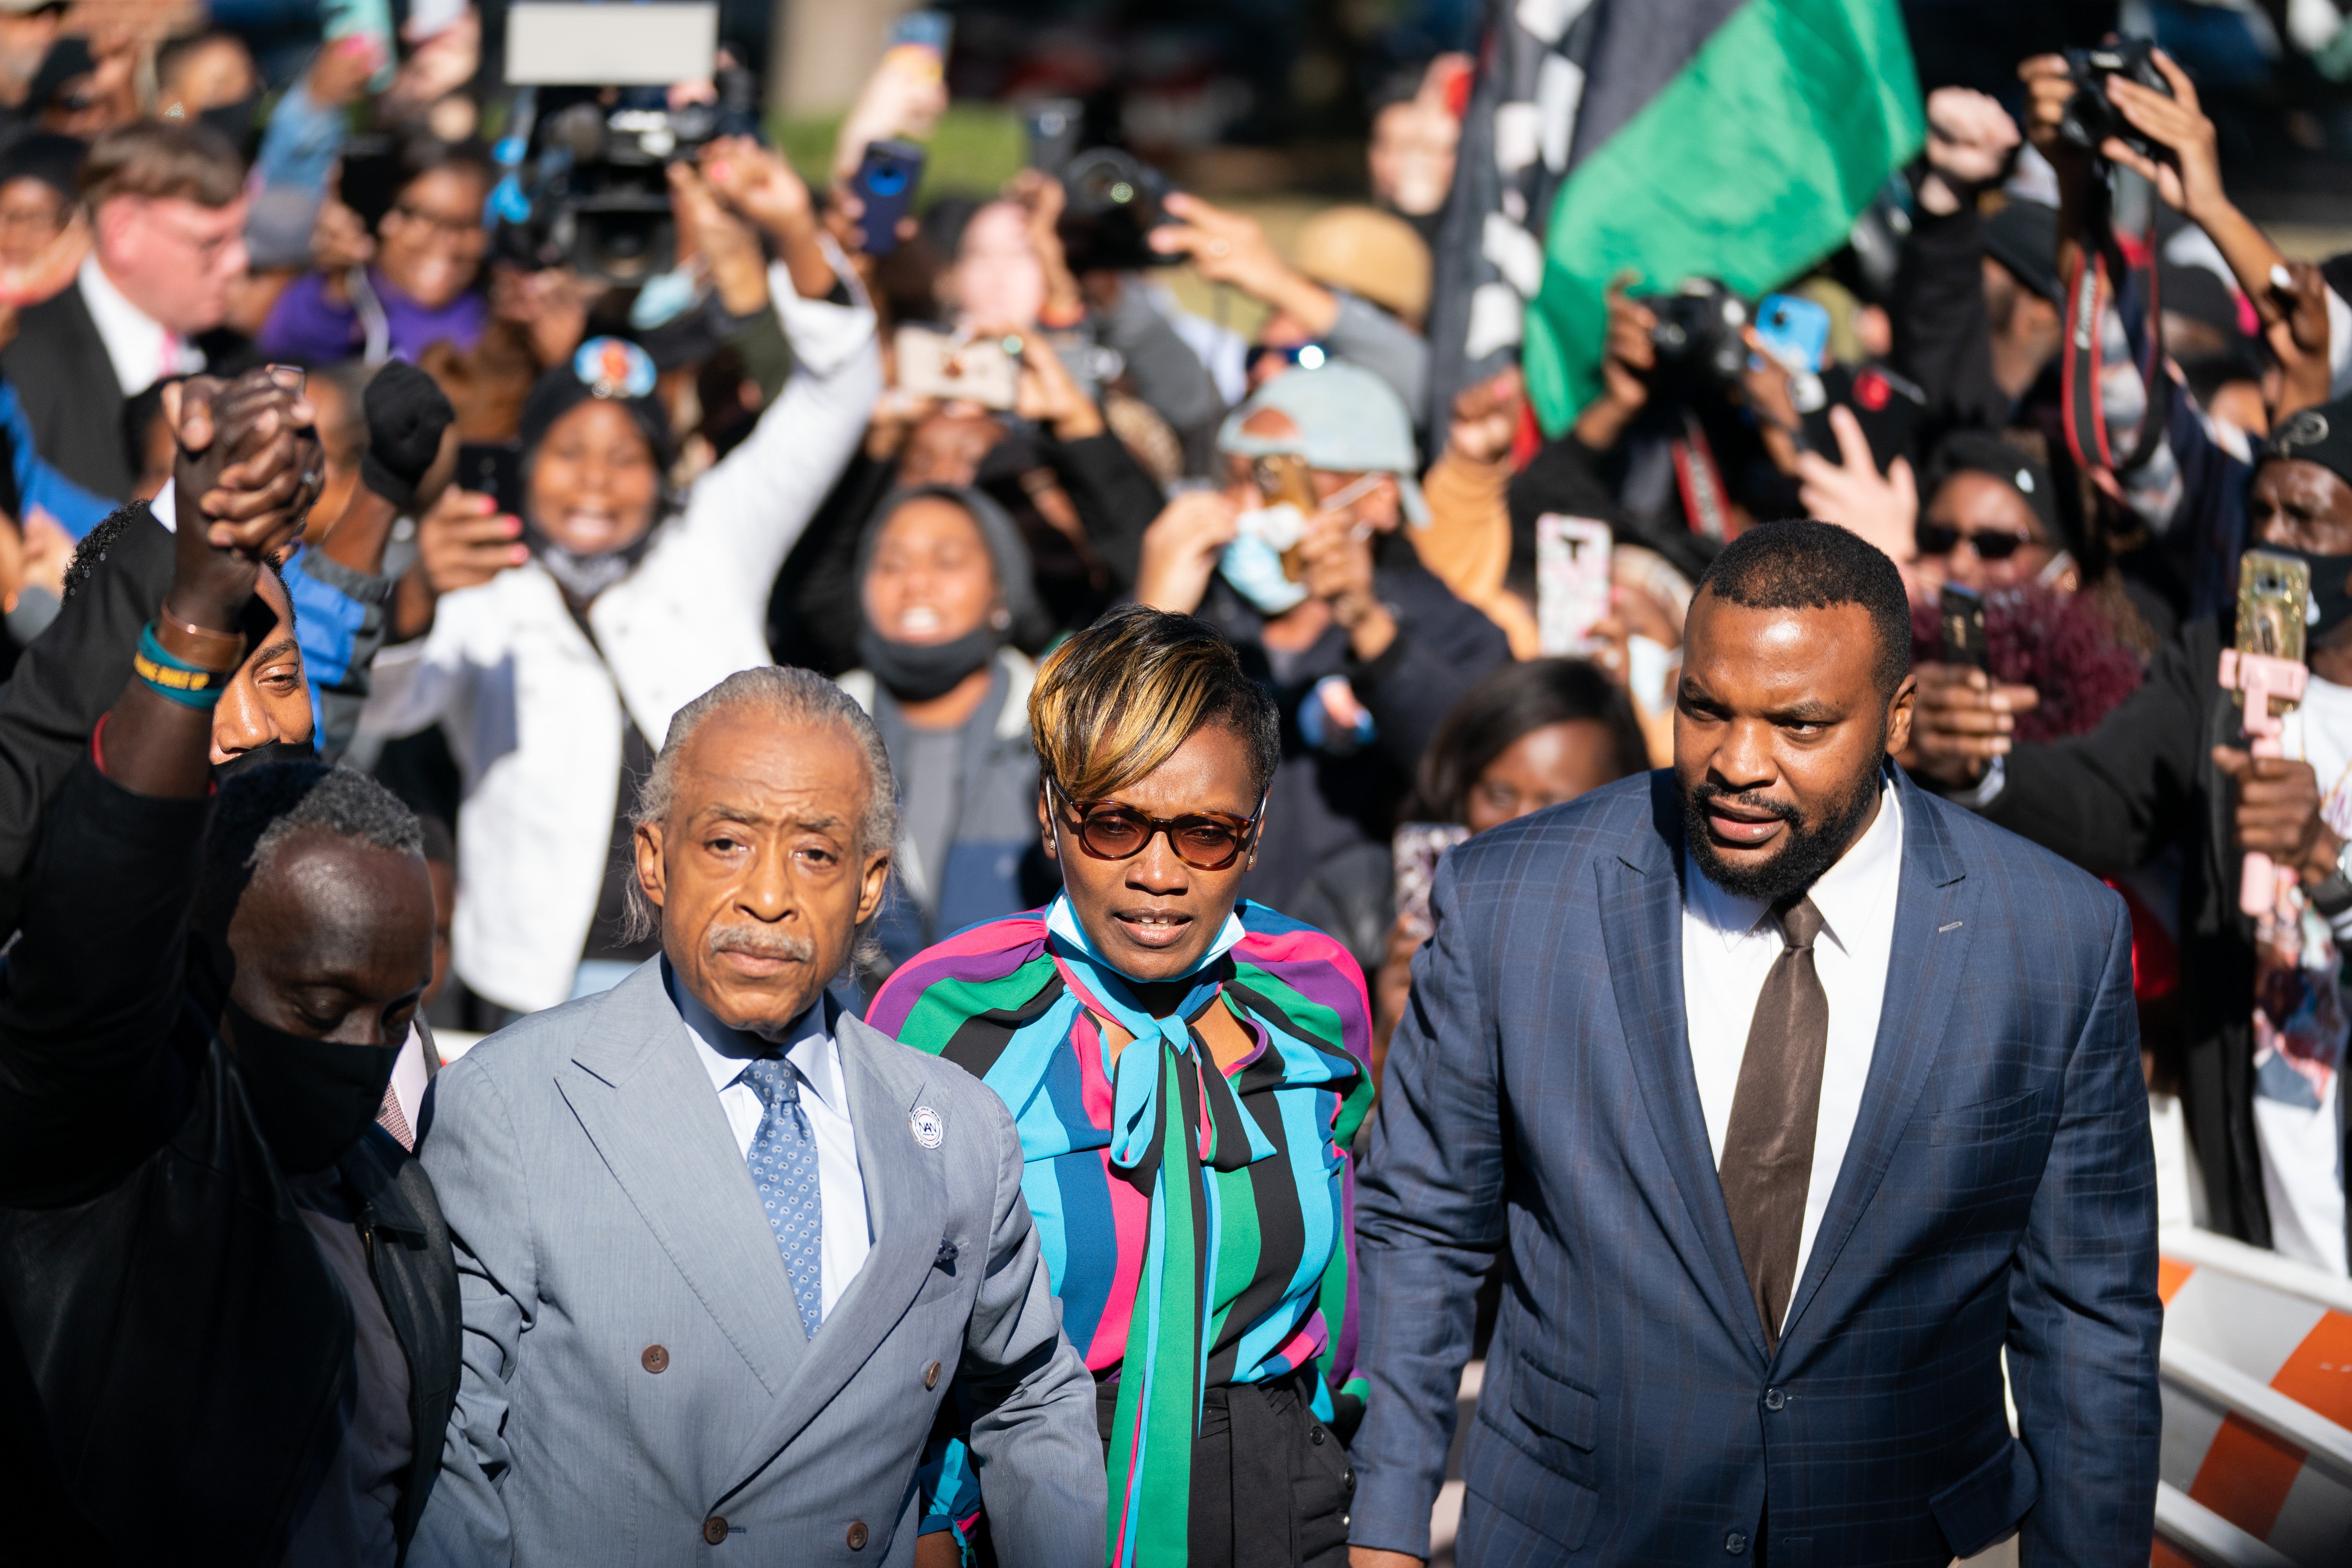 Lee Merritt, Wanda Cooper-Jones and Rev. Al Sharpton (from right to left) outside the courthouse in Georgia after the Black jogger’s three killers were found guilty of murder